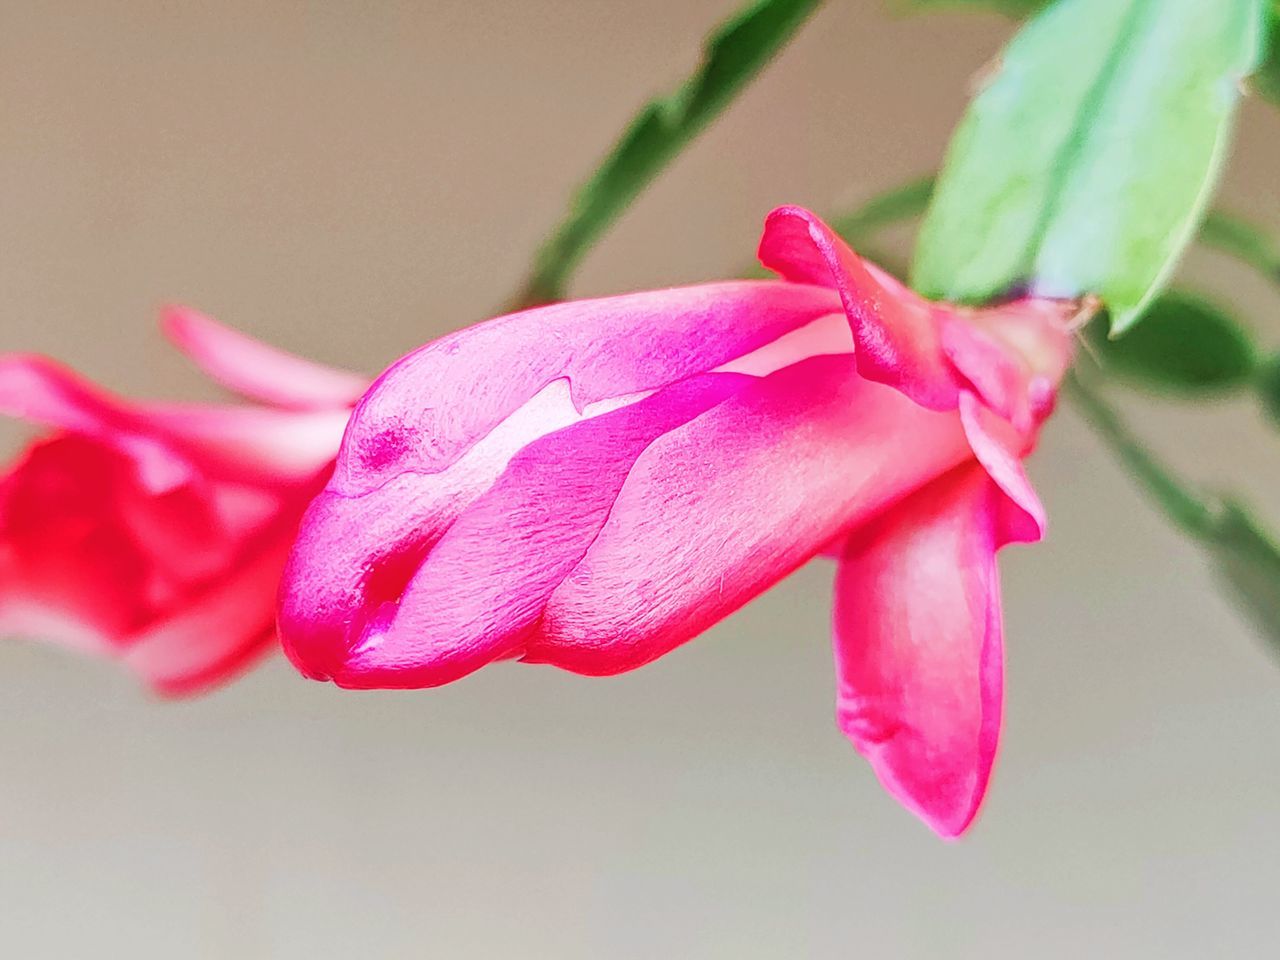 pink, flower, plant, flowering plant, freshness, beauty in nature, close-up, petal, macro photography, fragility, flower head, inflorescence, nature, growth, no people, focus on foreground, blossom, plant part, leaf, red, plant stem, outdoors, orchid, magenta, selective focus